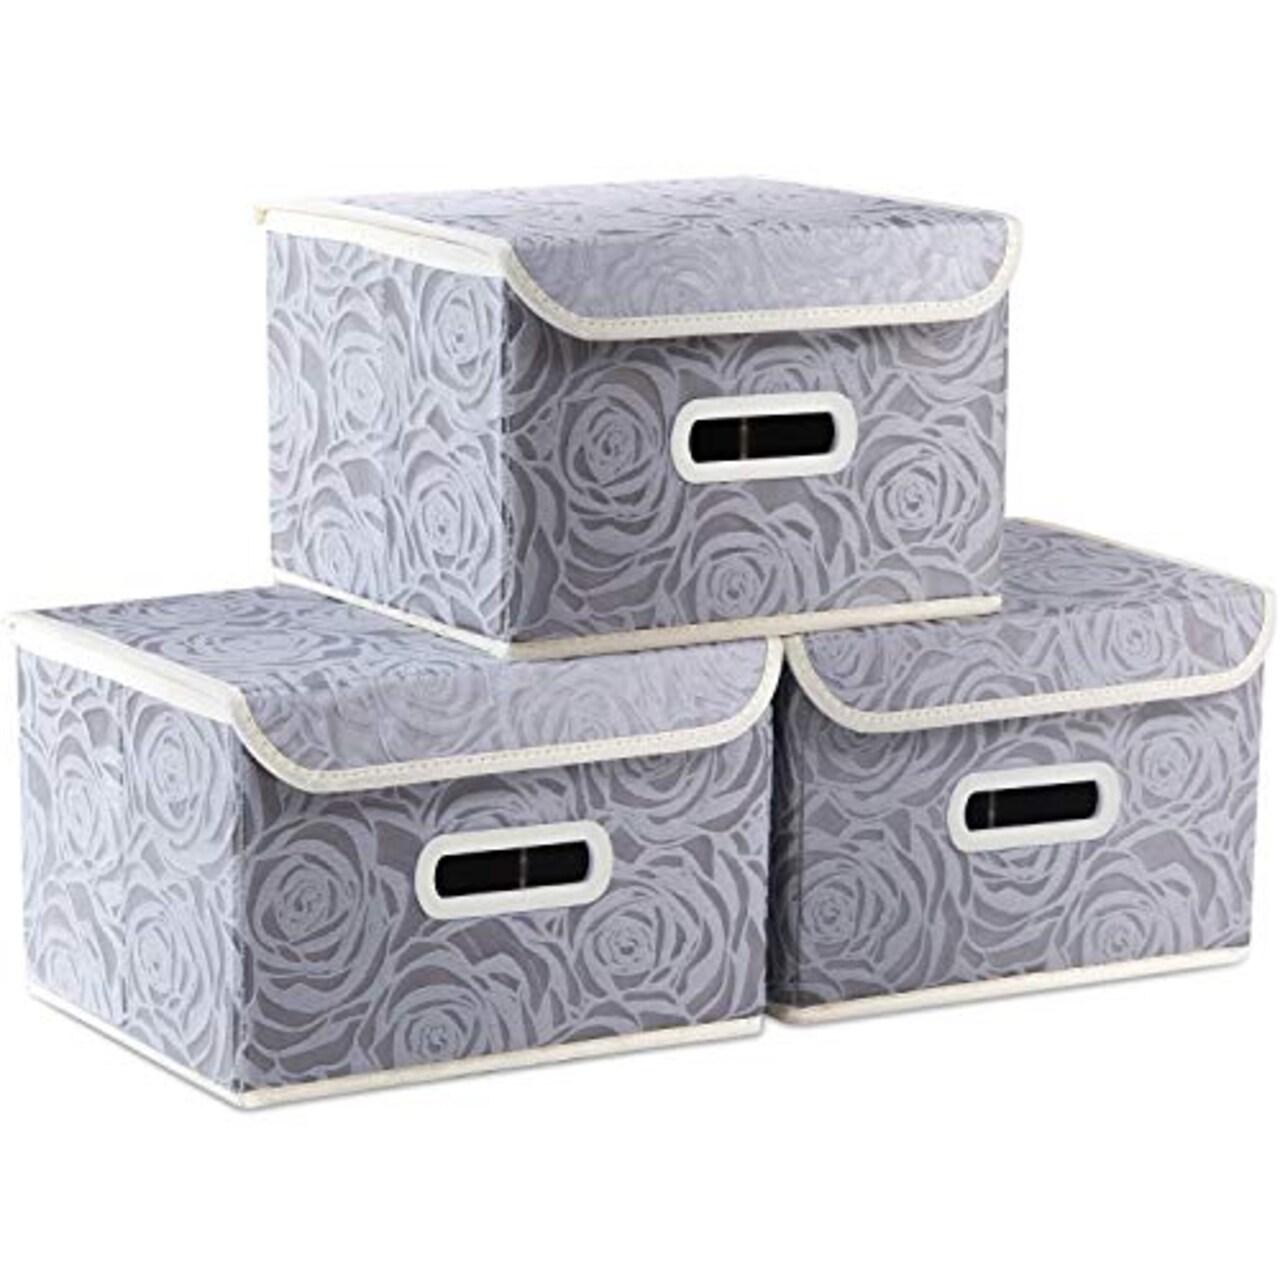 PRANDOM Collapsible Storage Boxes with Lids Fabric Decorative Storage Bins  Cubes Organizer Containers Baskets with Cover Handles Divider for Bedroom  Closet Living Room 9.8x7.9x6.7 Inch 3 Pack